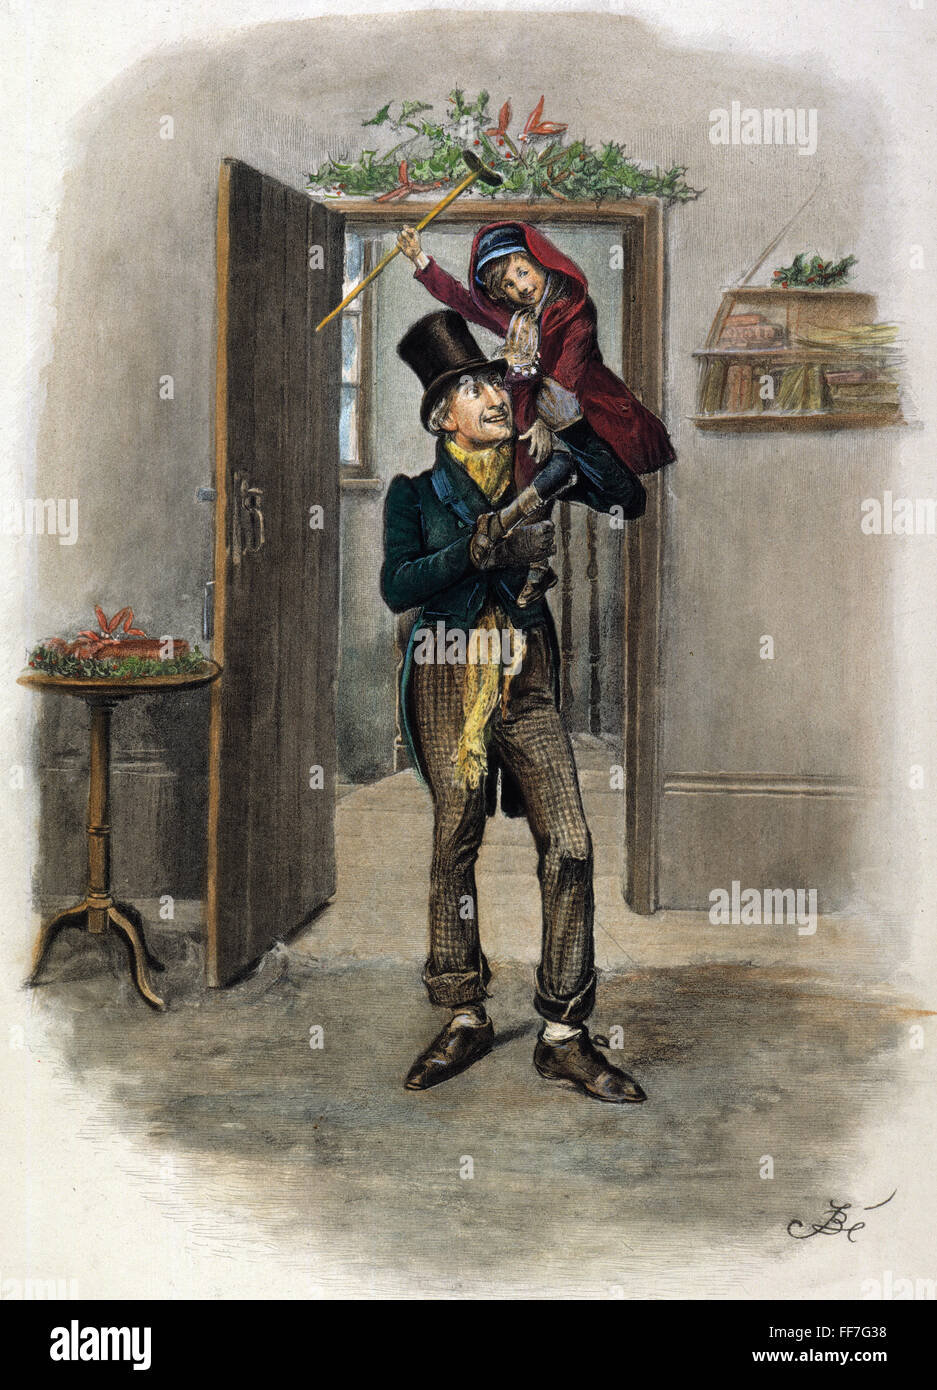 DICKENS: A CHRISTMAS CAROL. /nBob Cratchit and Tiny Tim. A 19th century illustration for Charles Dickens' 'A Christmas Carol.' Stock Photo